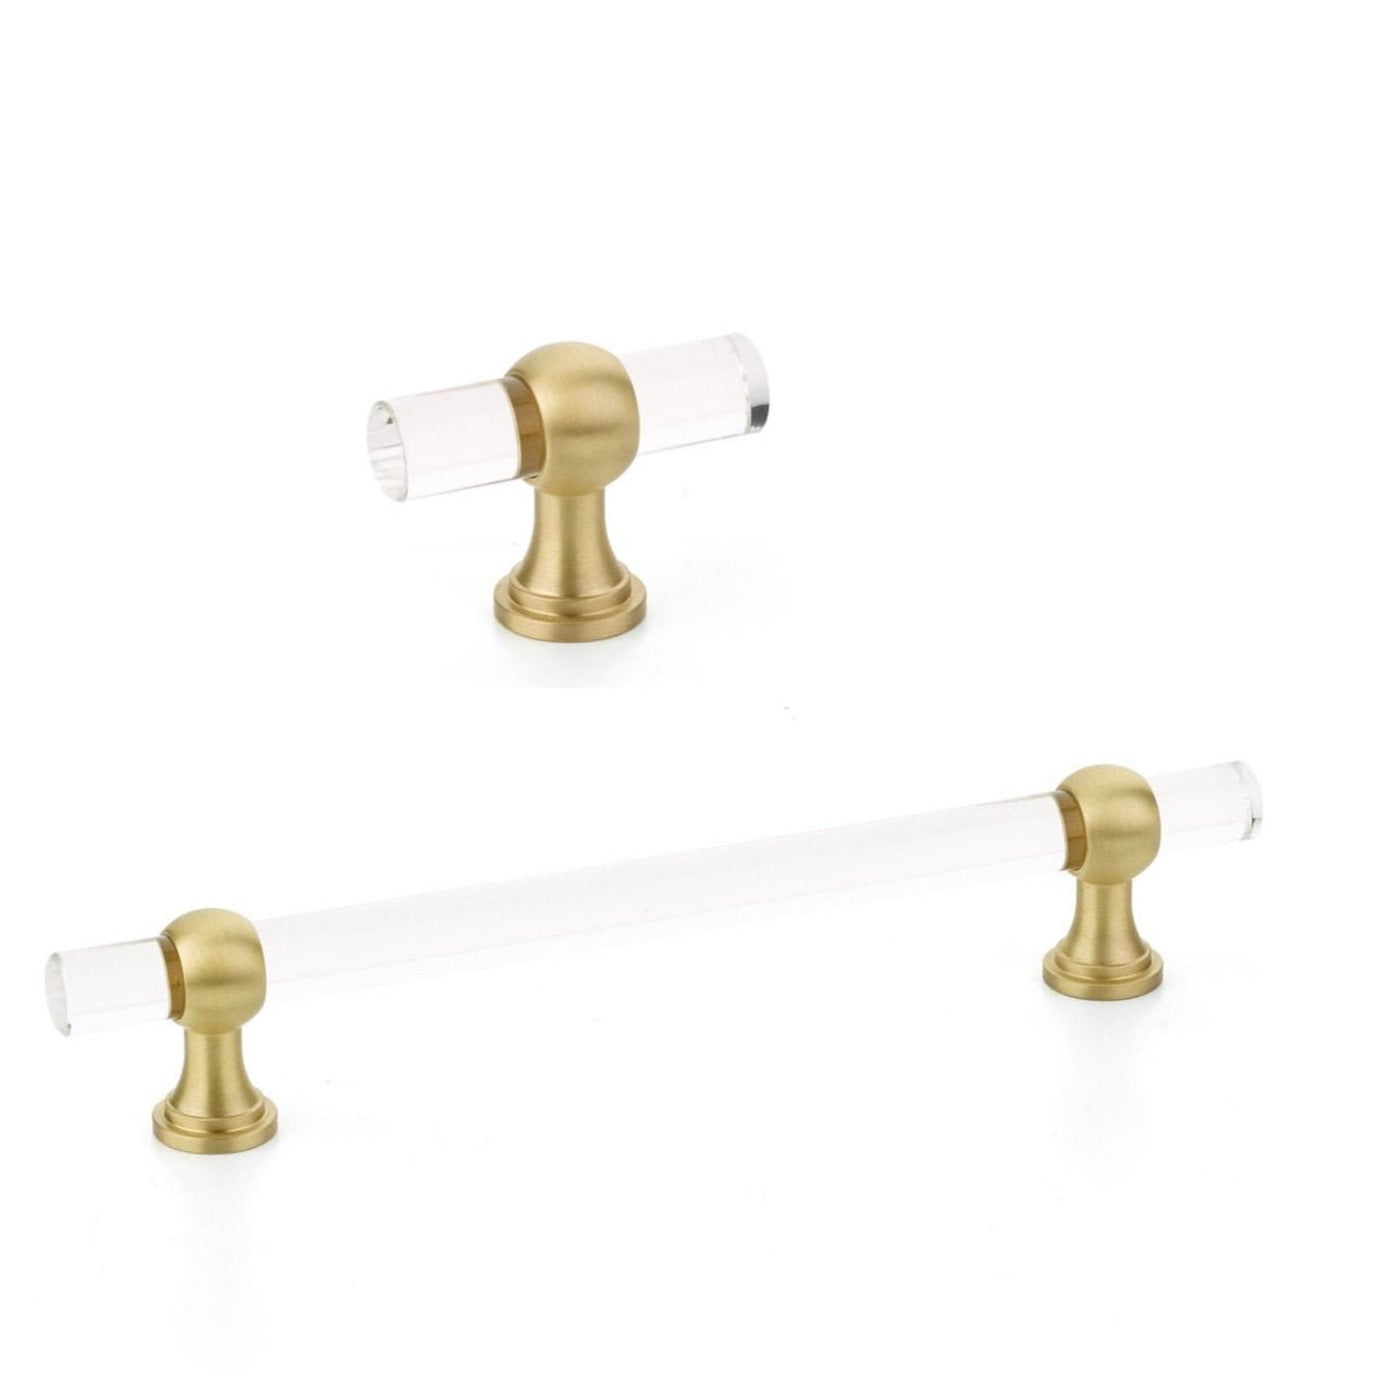 Brushed Brass and Lucite "Gleam" Cabinet Knobs and Drawer Pulls (Adjustable) - Forge Hardware Studio